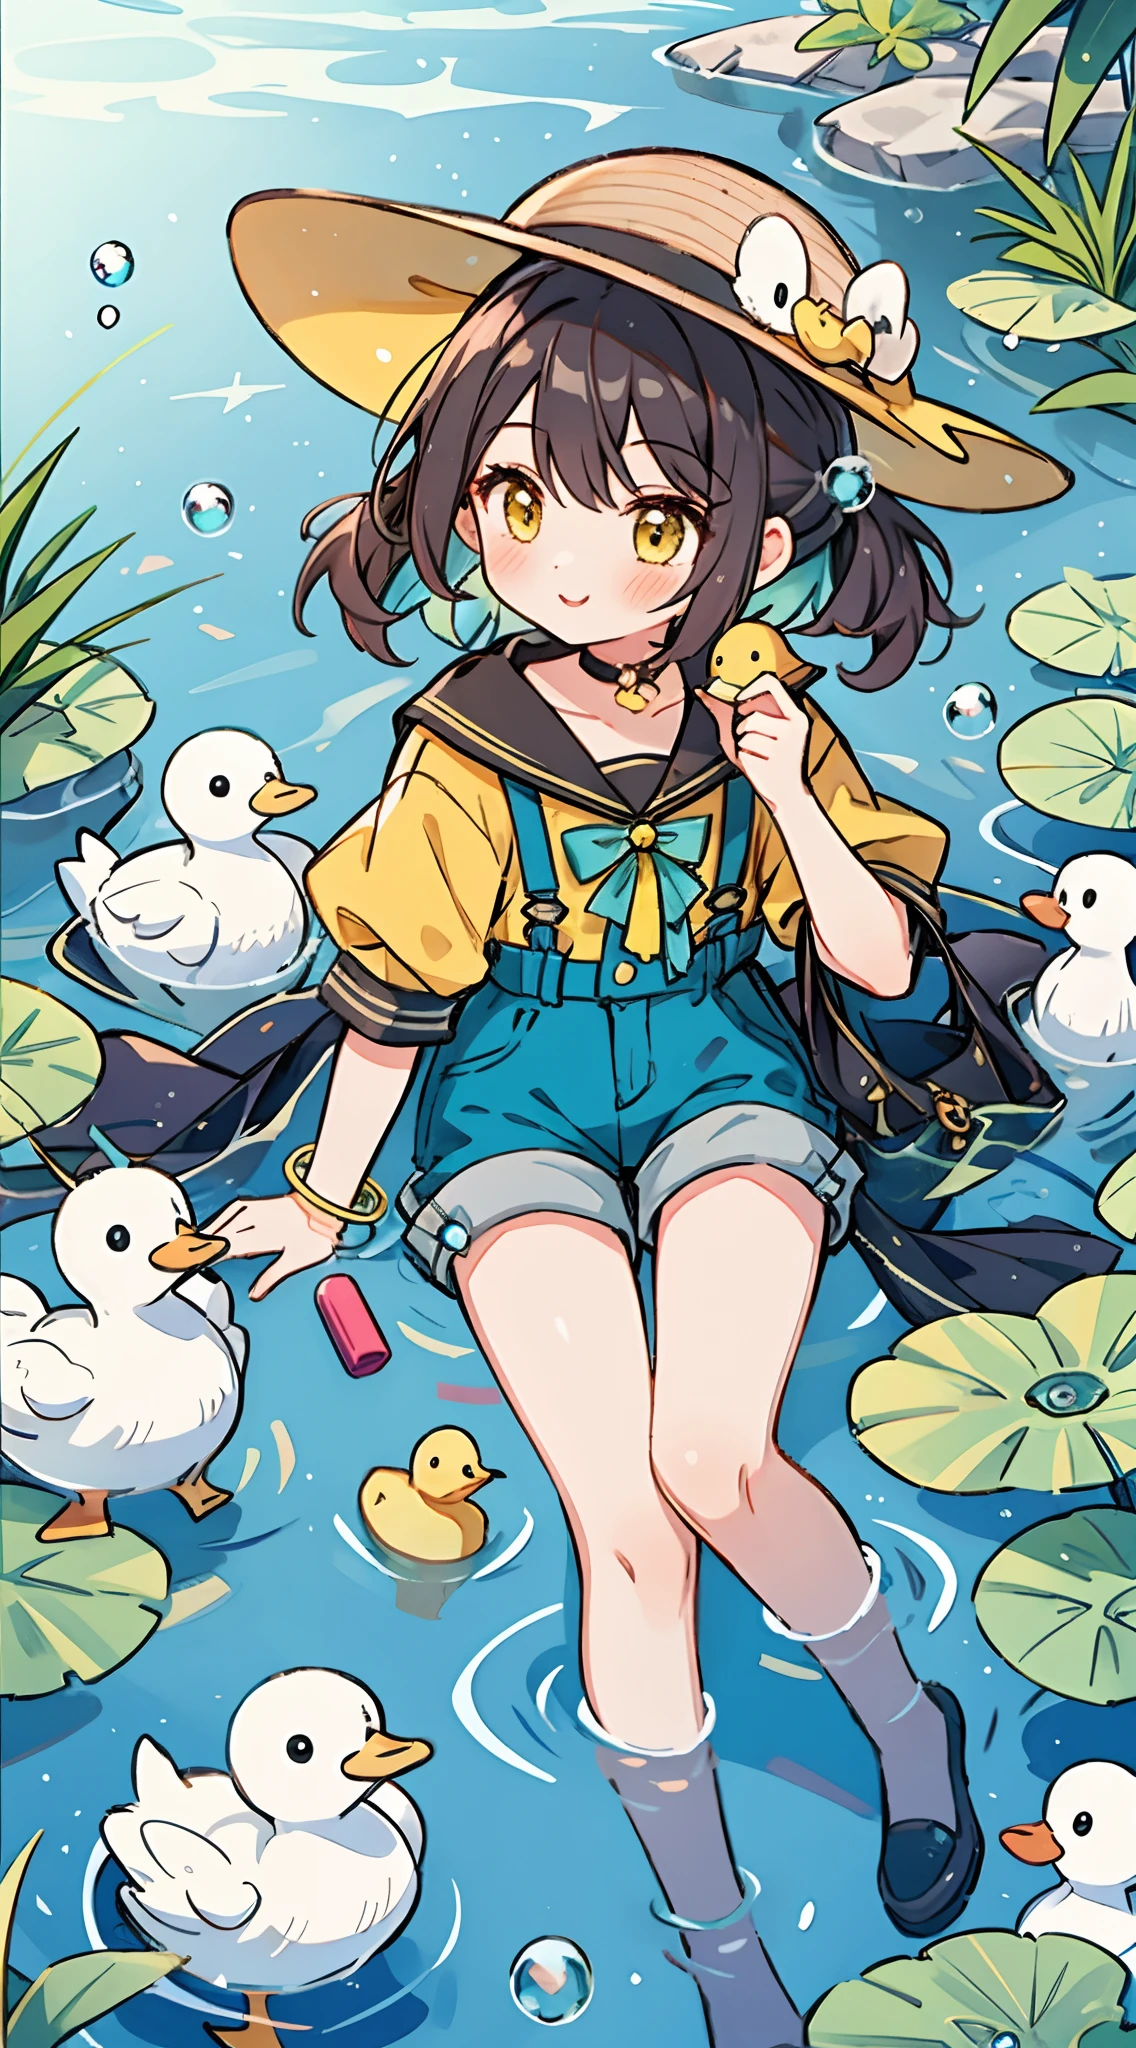 1girl, duckie theme, toy duck, yellow animal cute, she is playing with ducks in a lake with turquois waters and bubbles floating around, cute hat, duckie shaped choker and accesories, shorts in yellow color, her hair is black and long